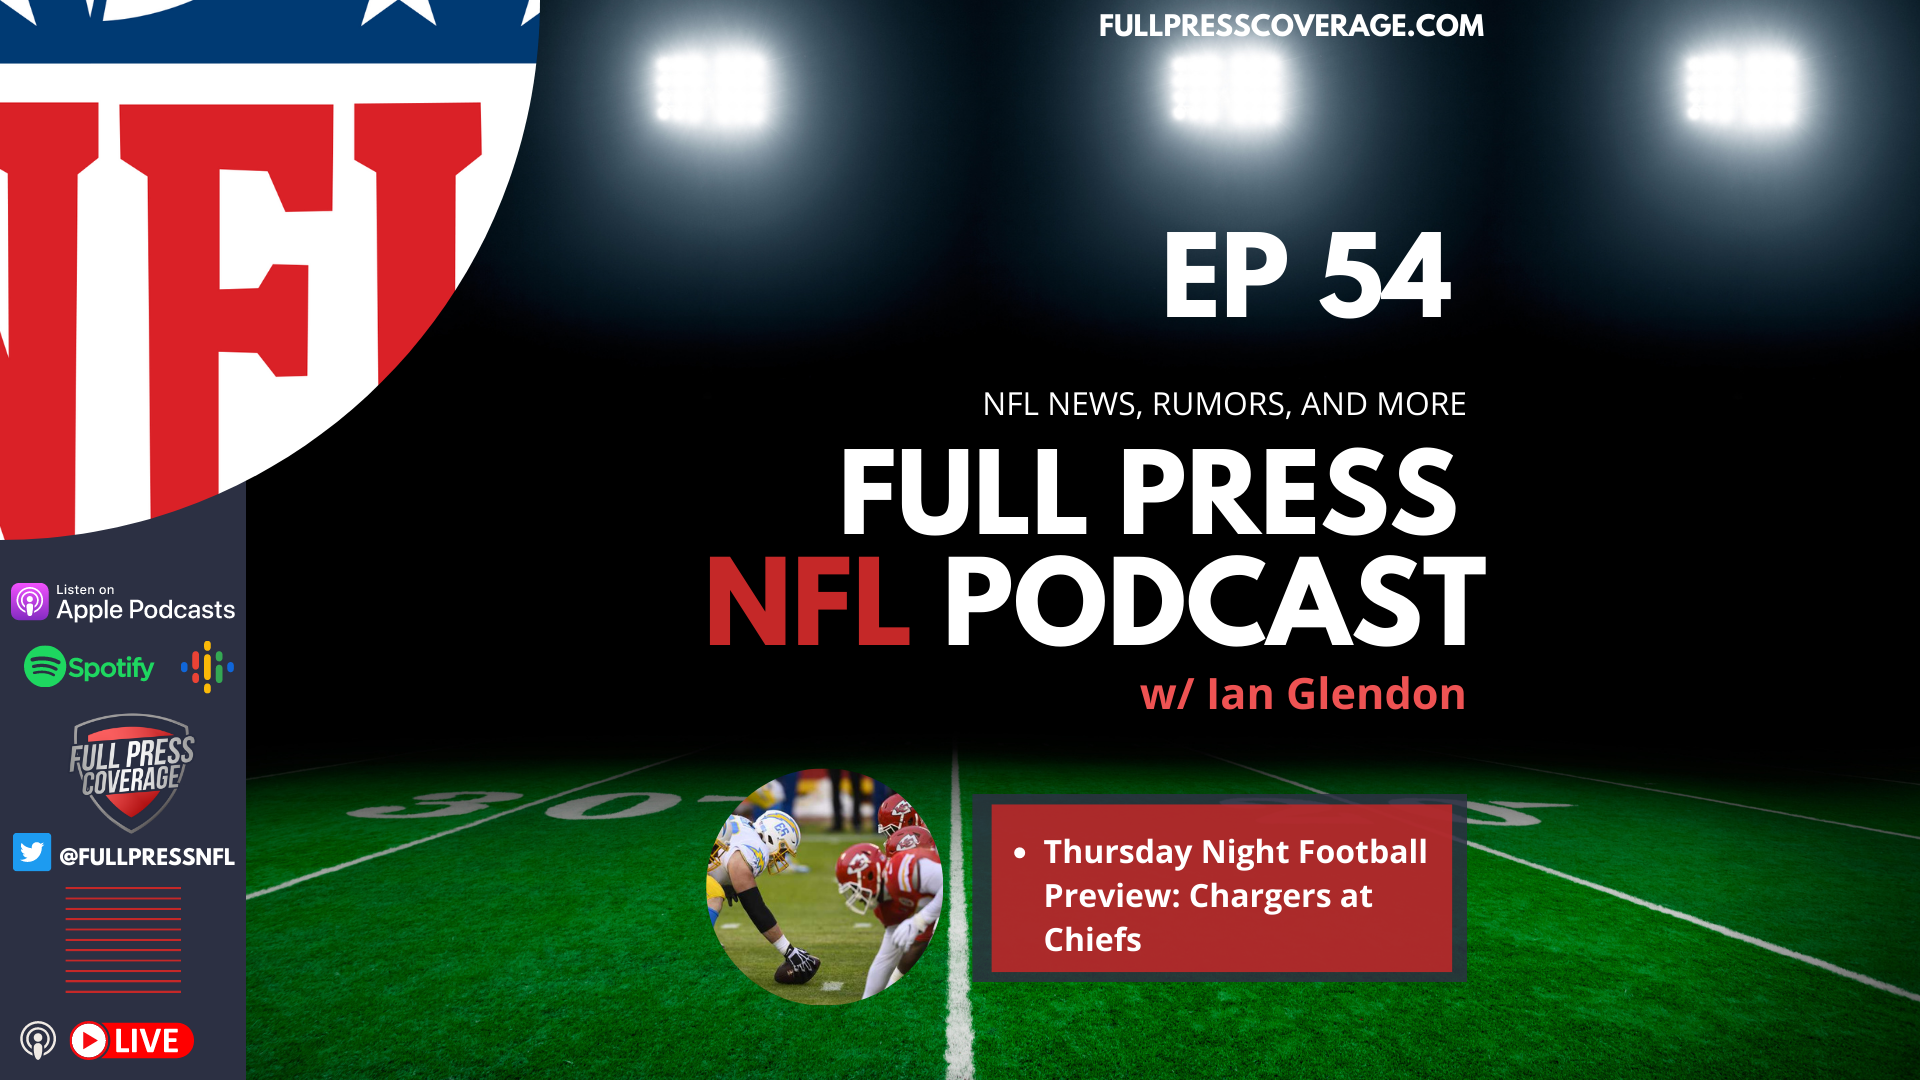 Full Press NFL Podcast Ep 54: Chargers At Chiefs Preview